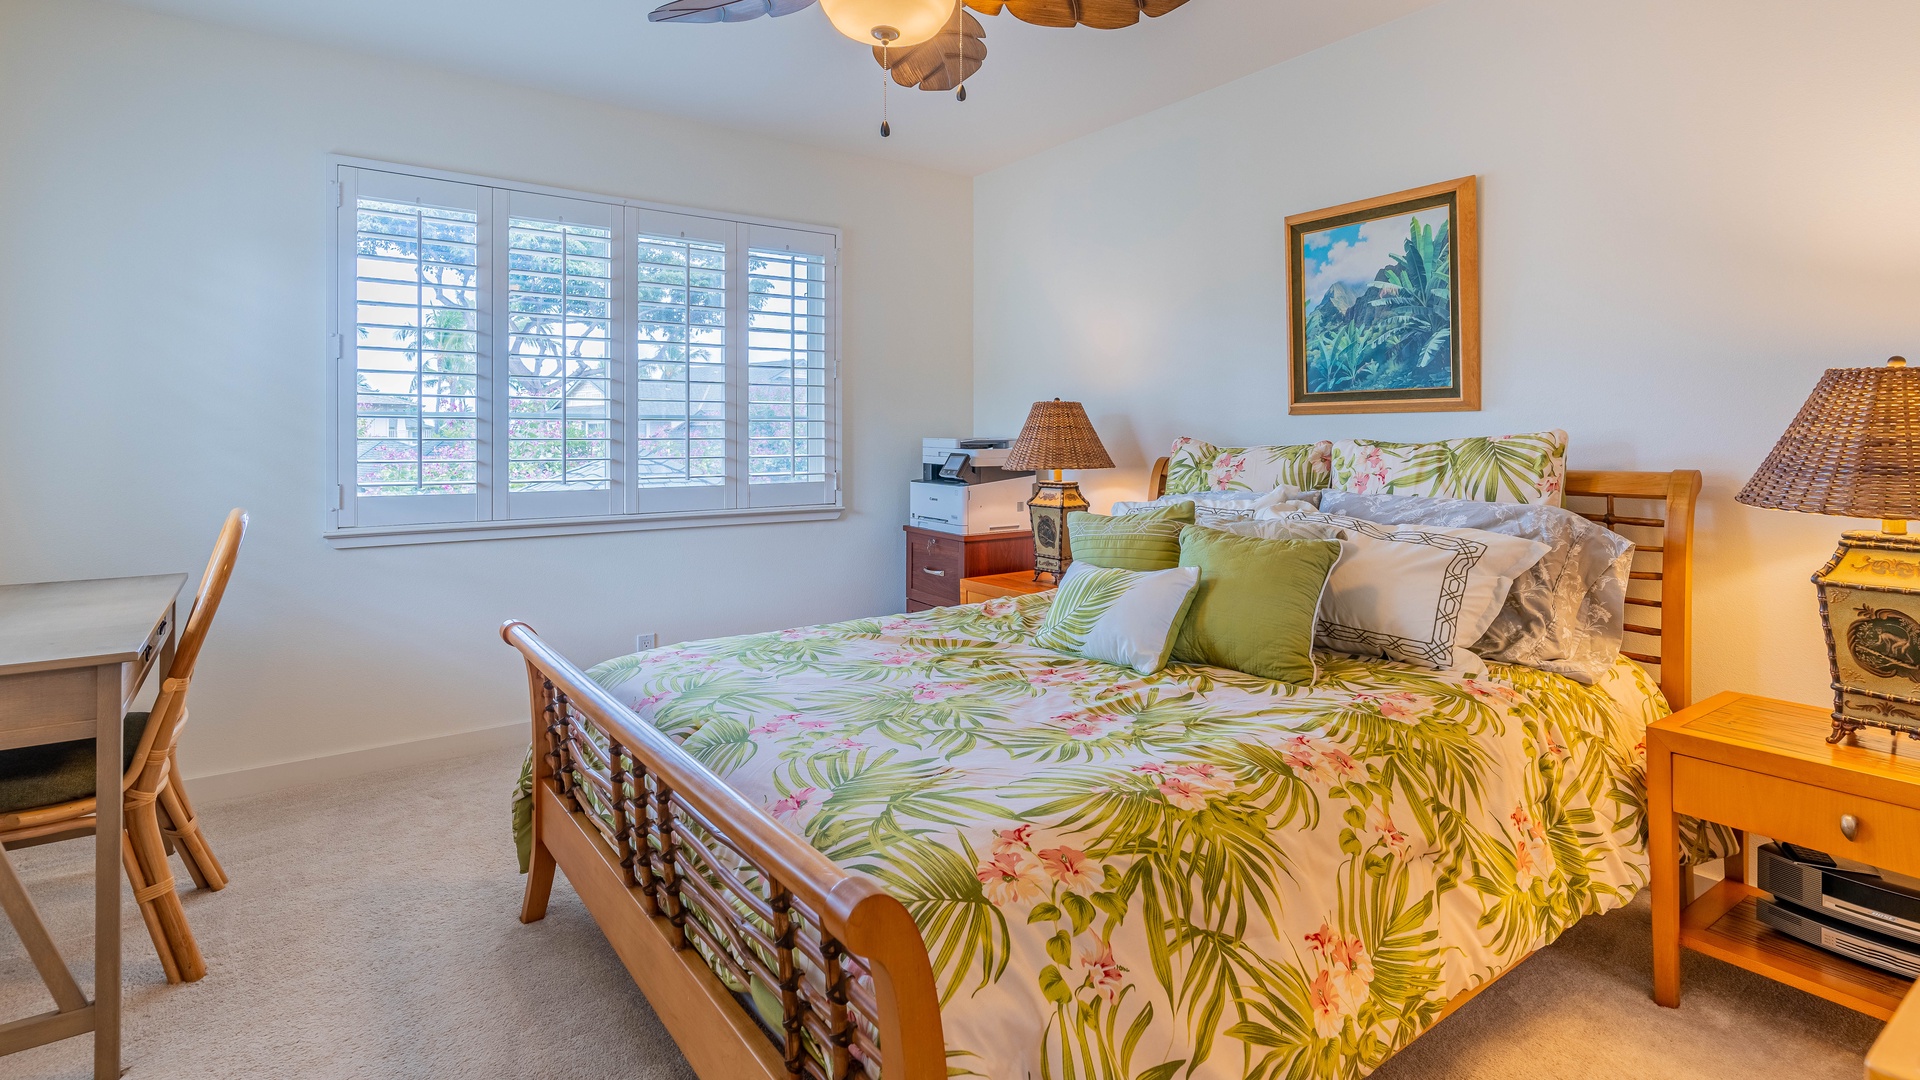 Kapolei Vacation Rentals, Kai Lani 20C - The second guest bedroom with Polynesian furnishings and storage.